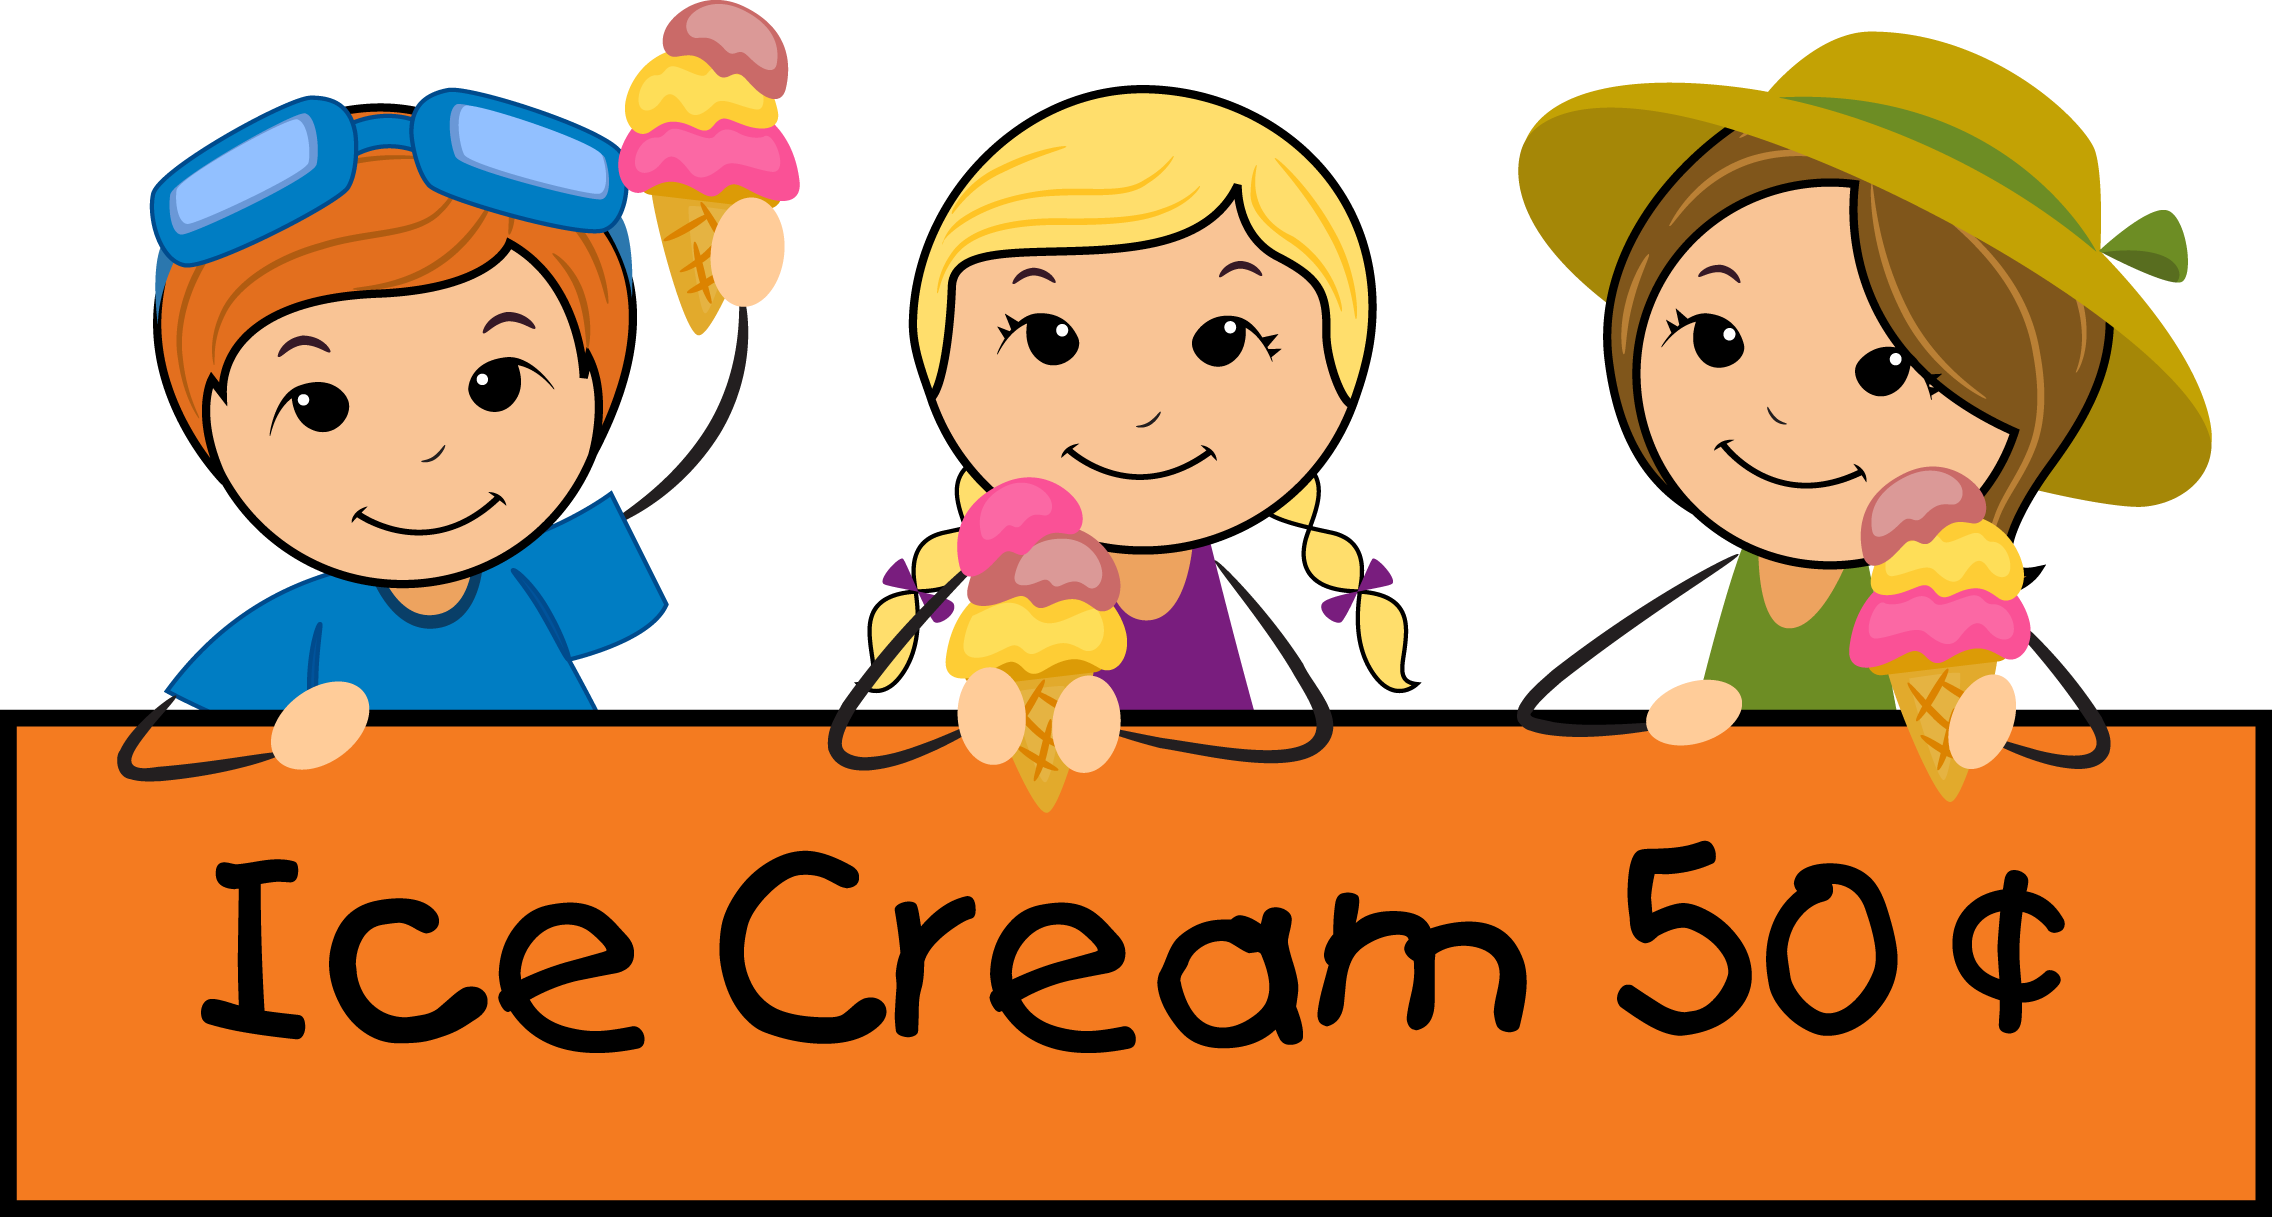 Summer clip art images. Words clipart ice cream